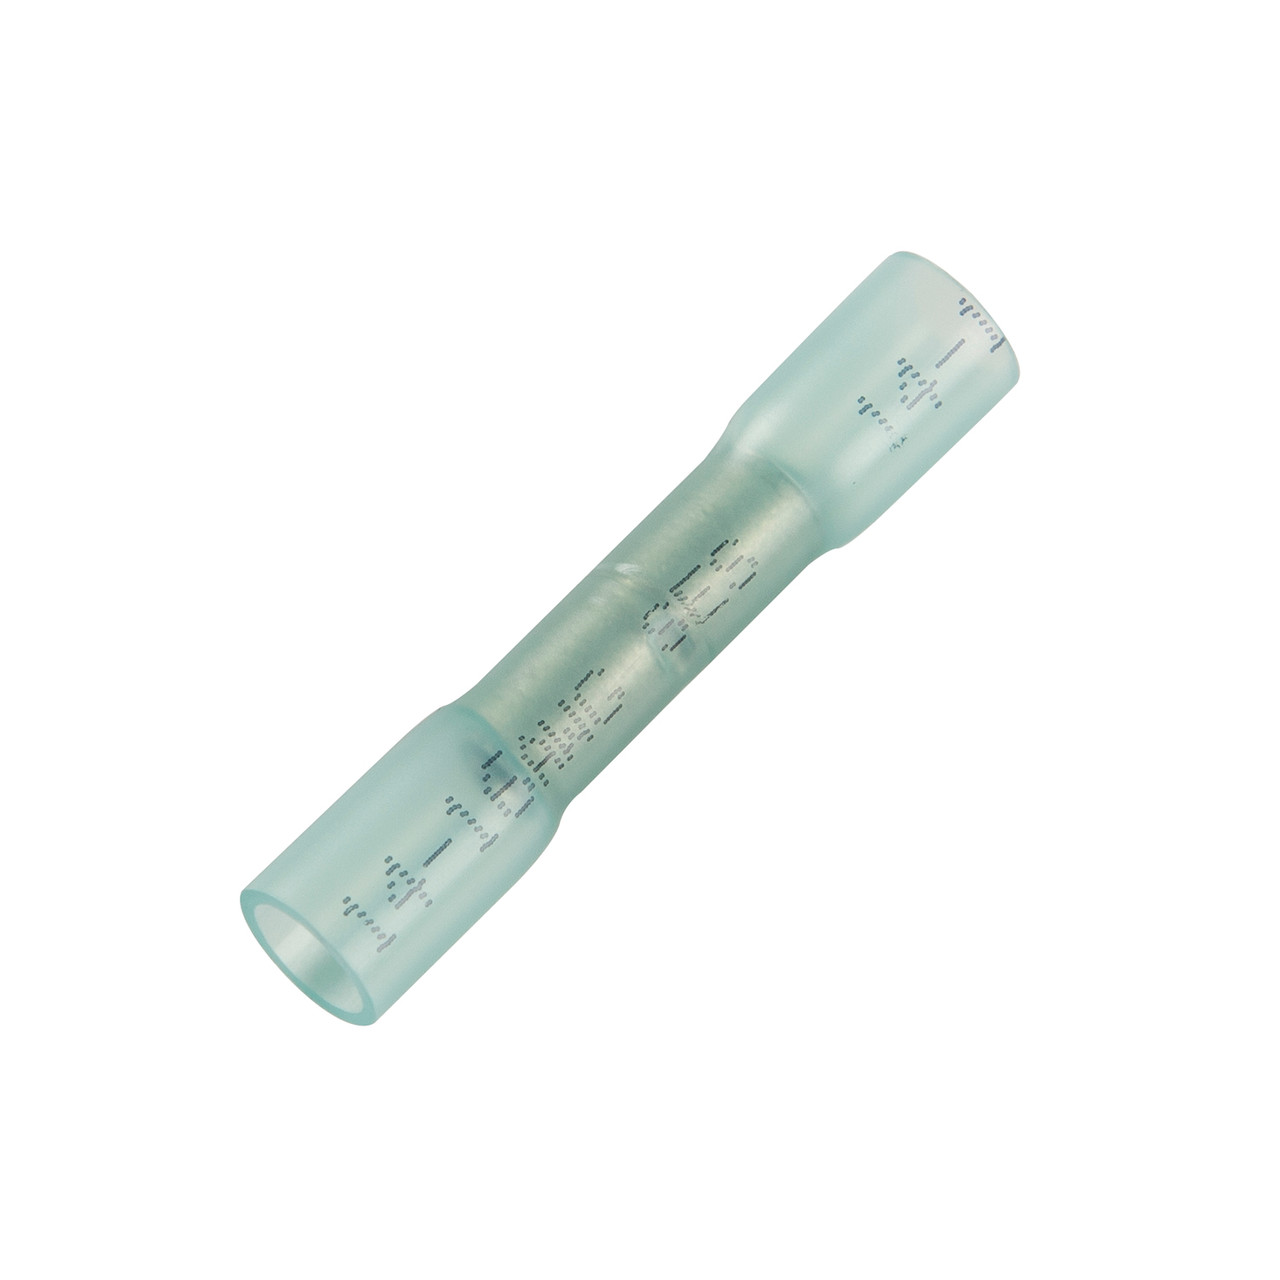 16 - 14 AWG Heat Shrinkable Butt Connectors - Polyolefin @ 15 Pack - Blue  84-3350